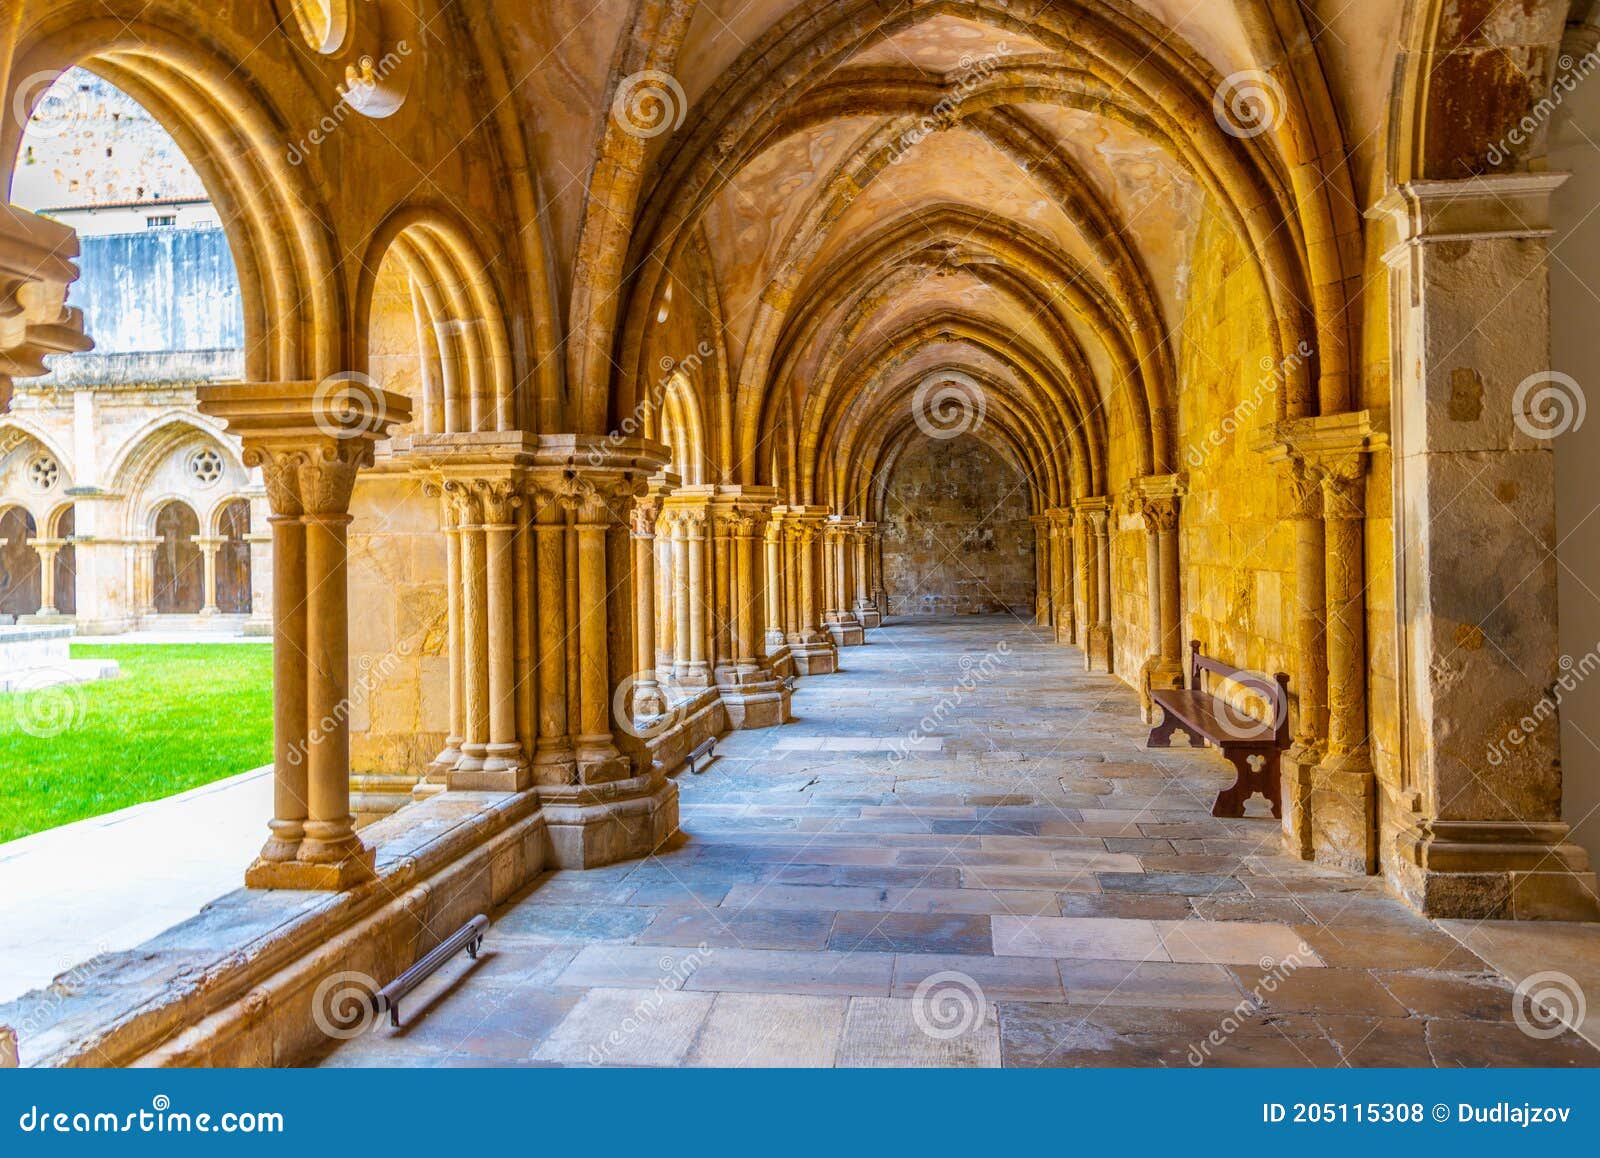 cloister of se velha cathedral in coimbra, portugal